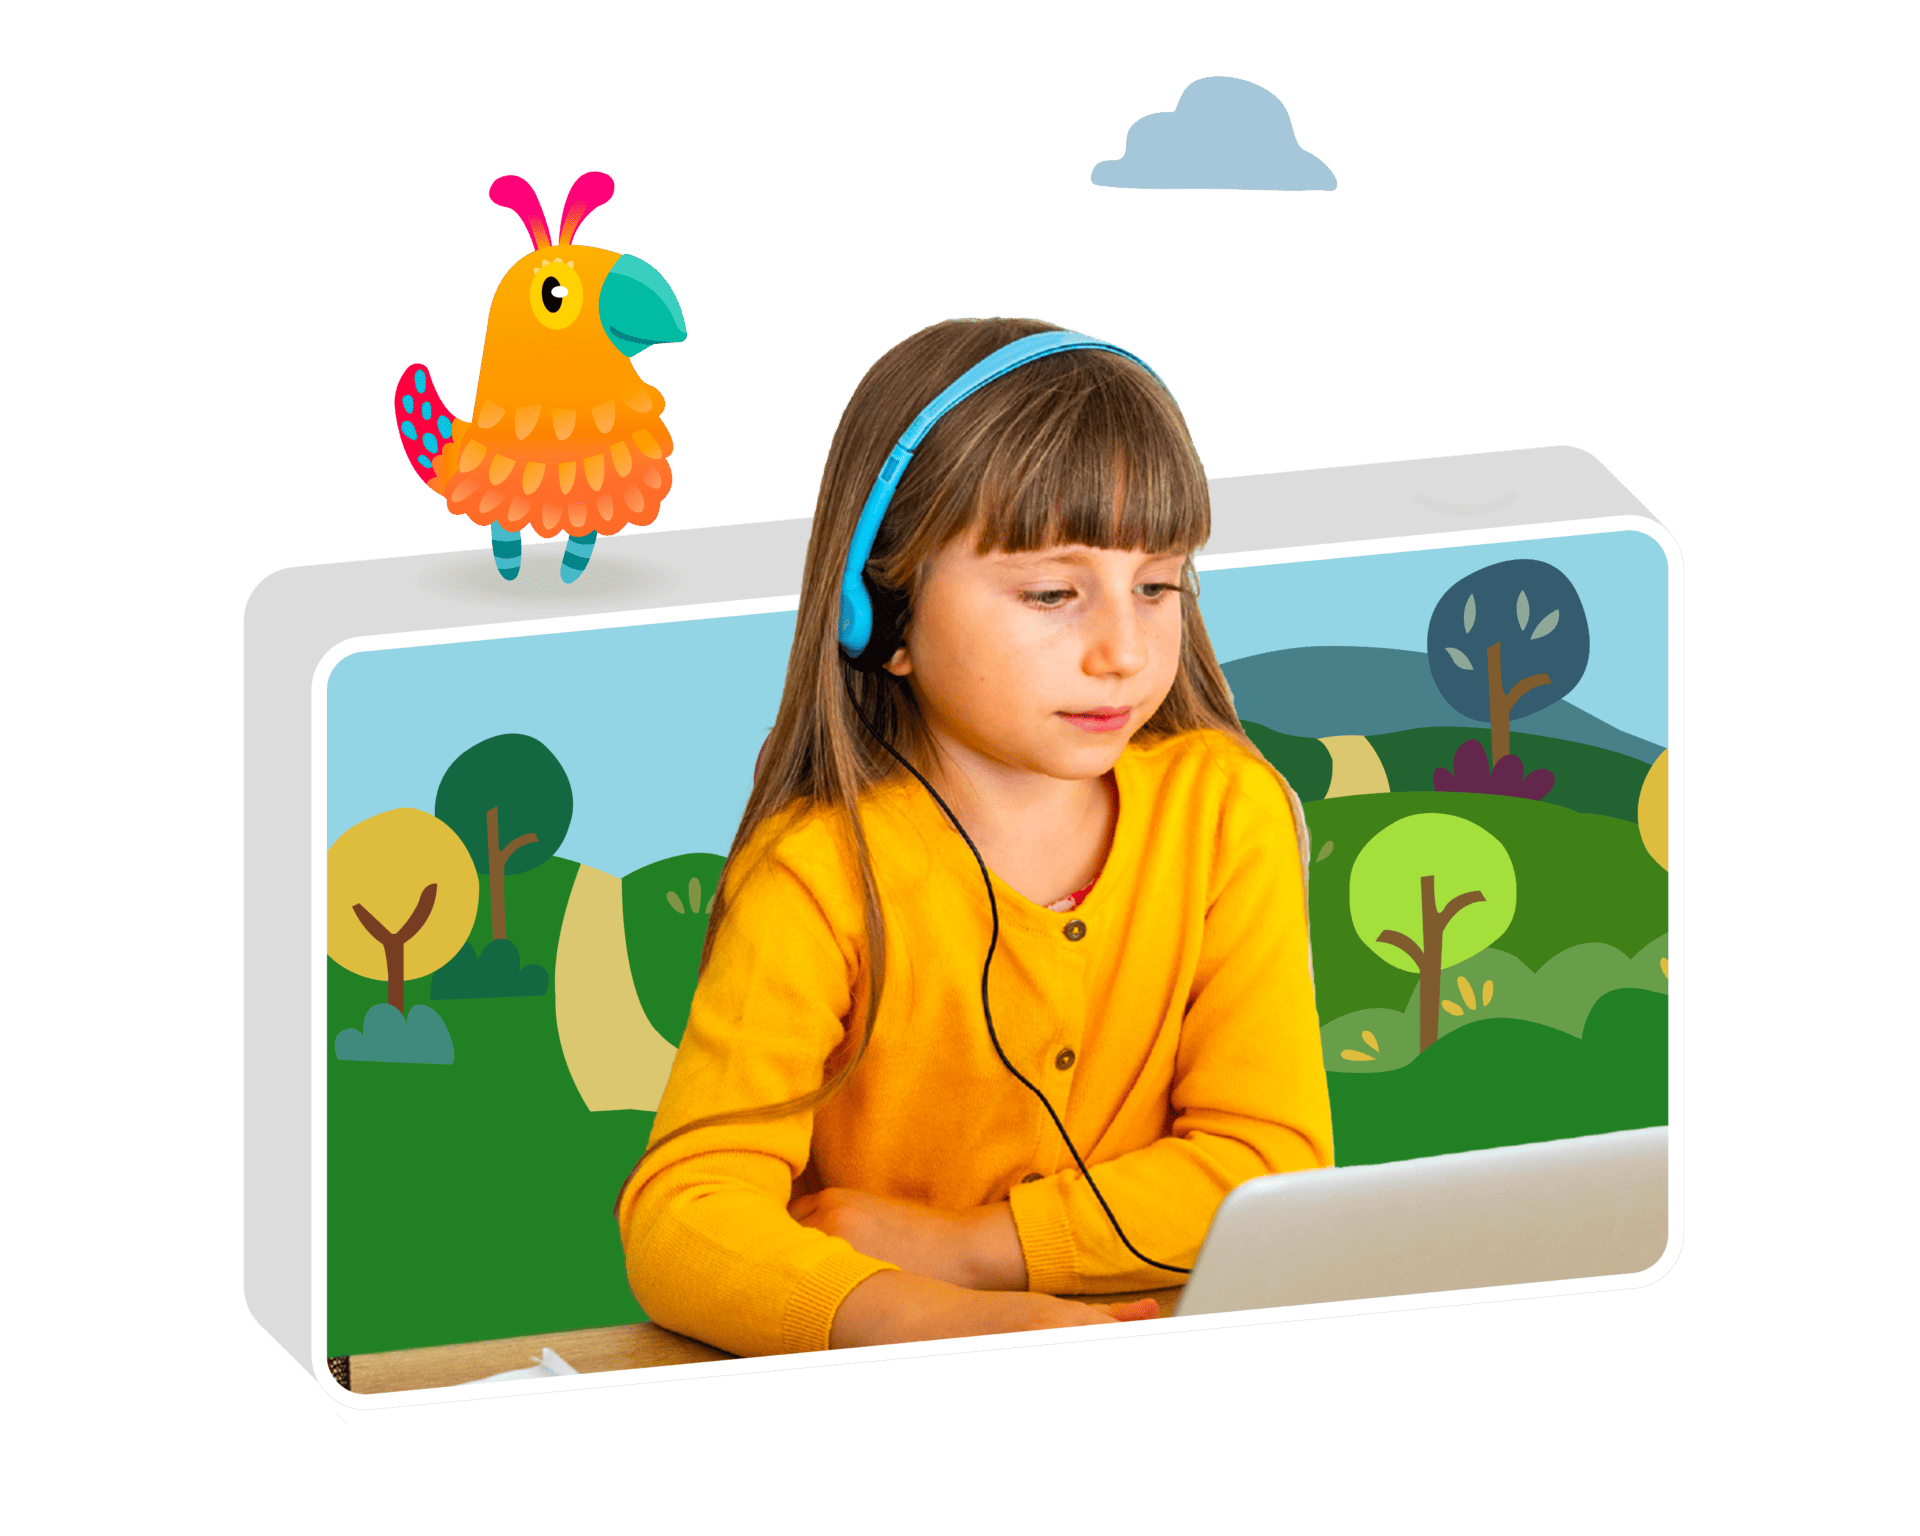 A young girl in a yellow cardigan and headphones focuses on a laptop in a colorful, cartoon-styled early literacy suite.